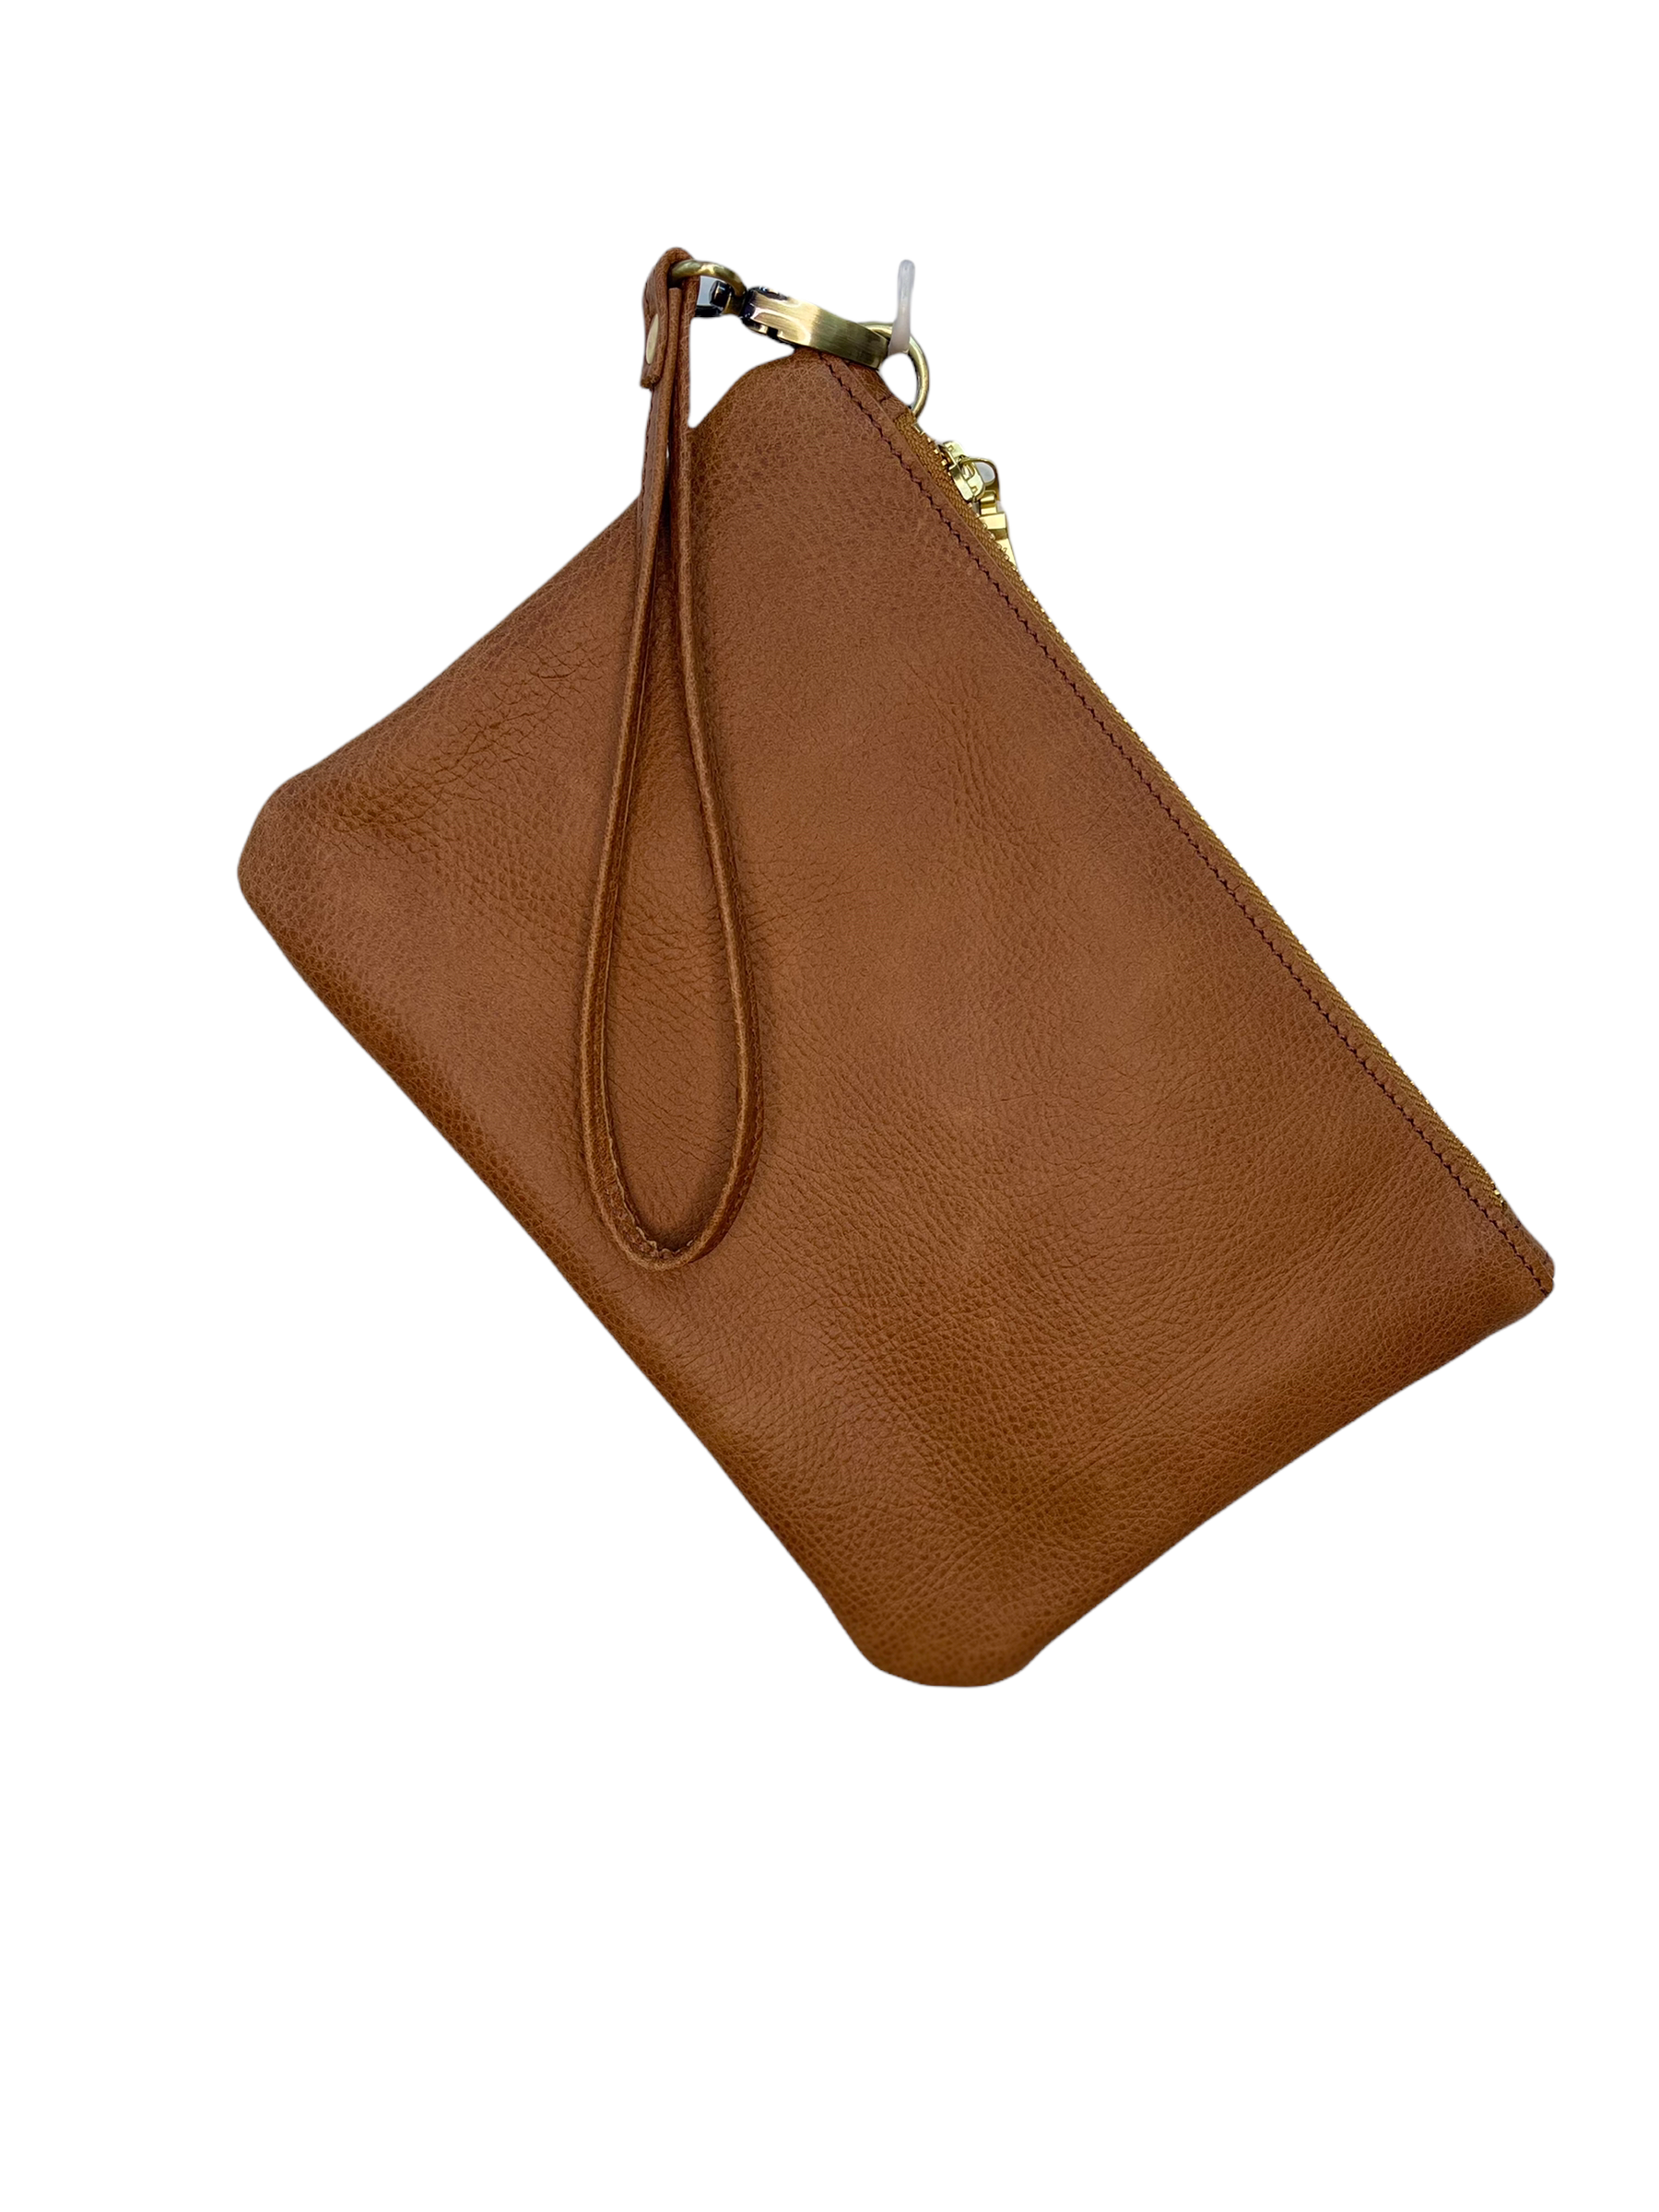 New Andover Clutch Tan Leather #72